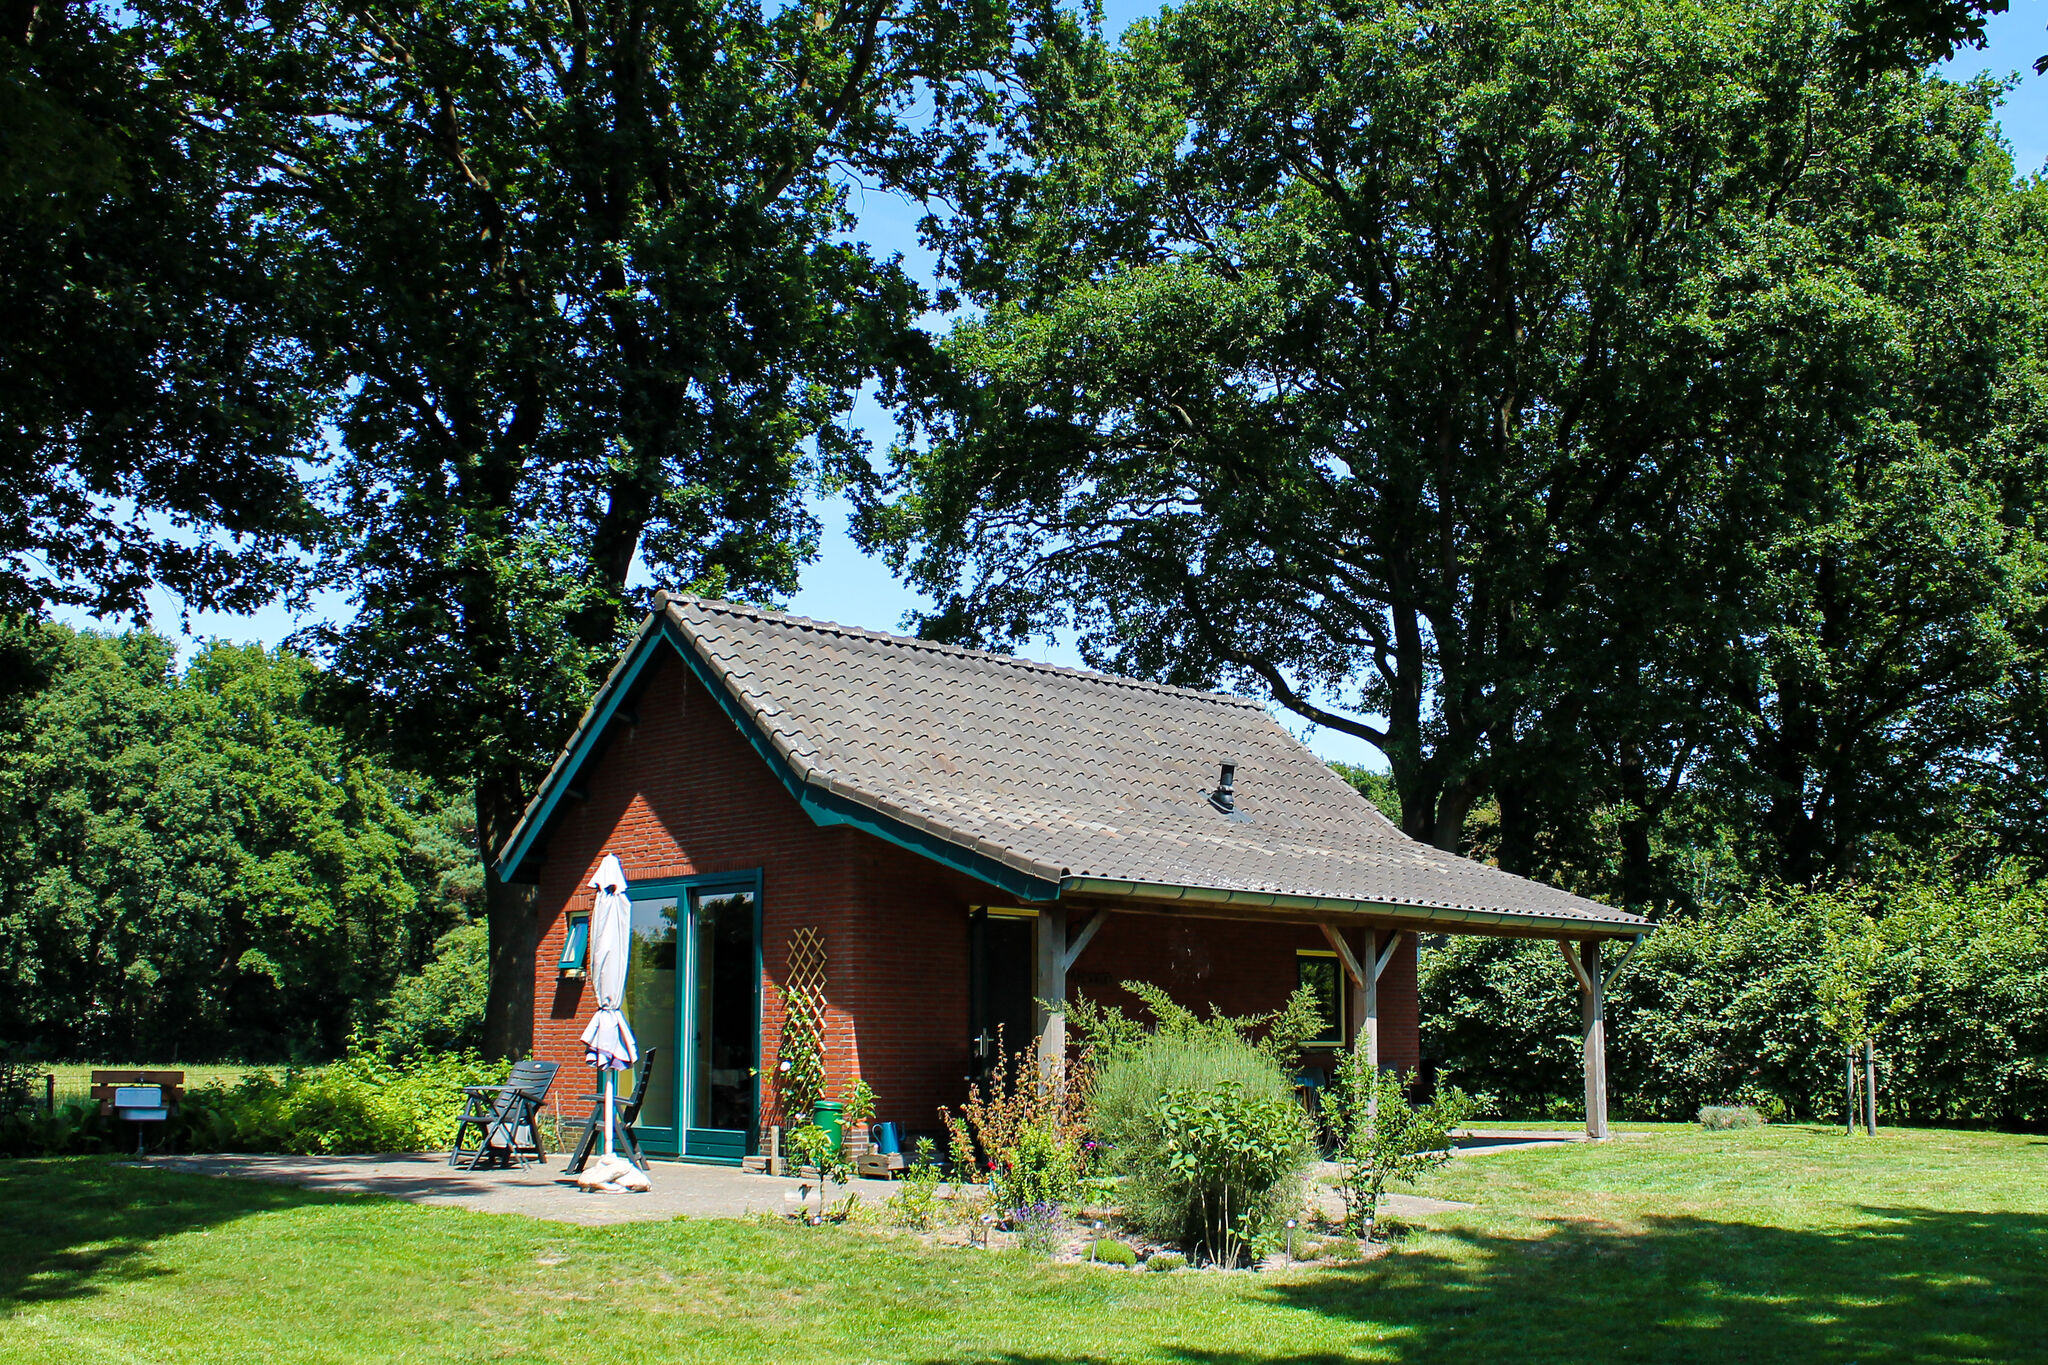 Holiday cottage in Schijf with a fenced garden